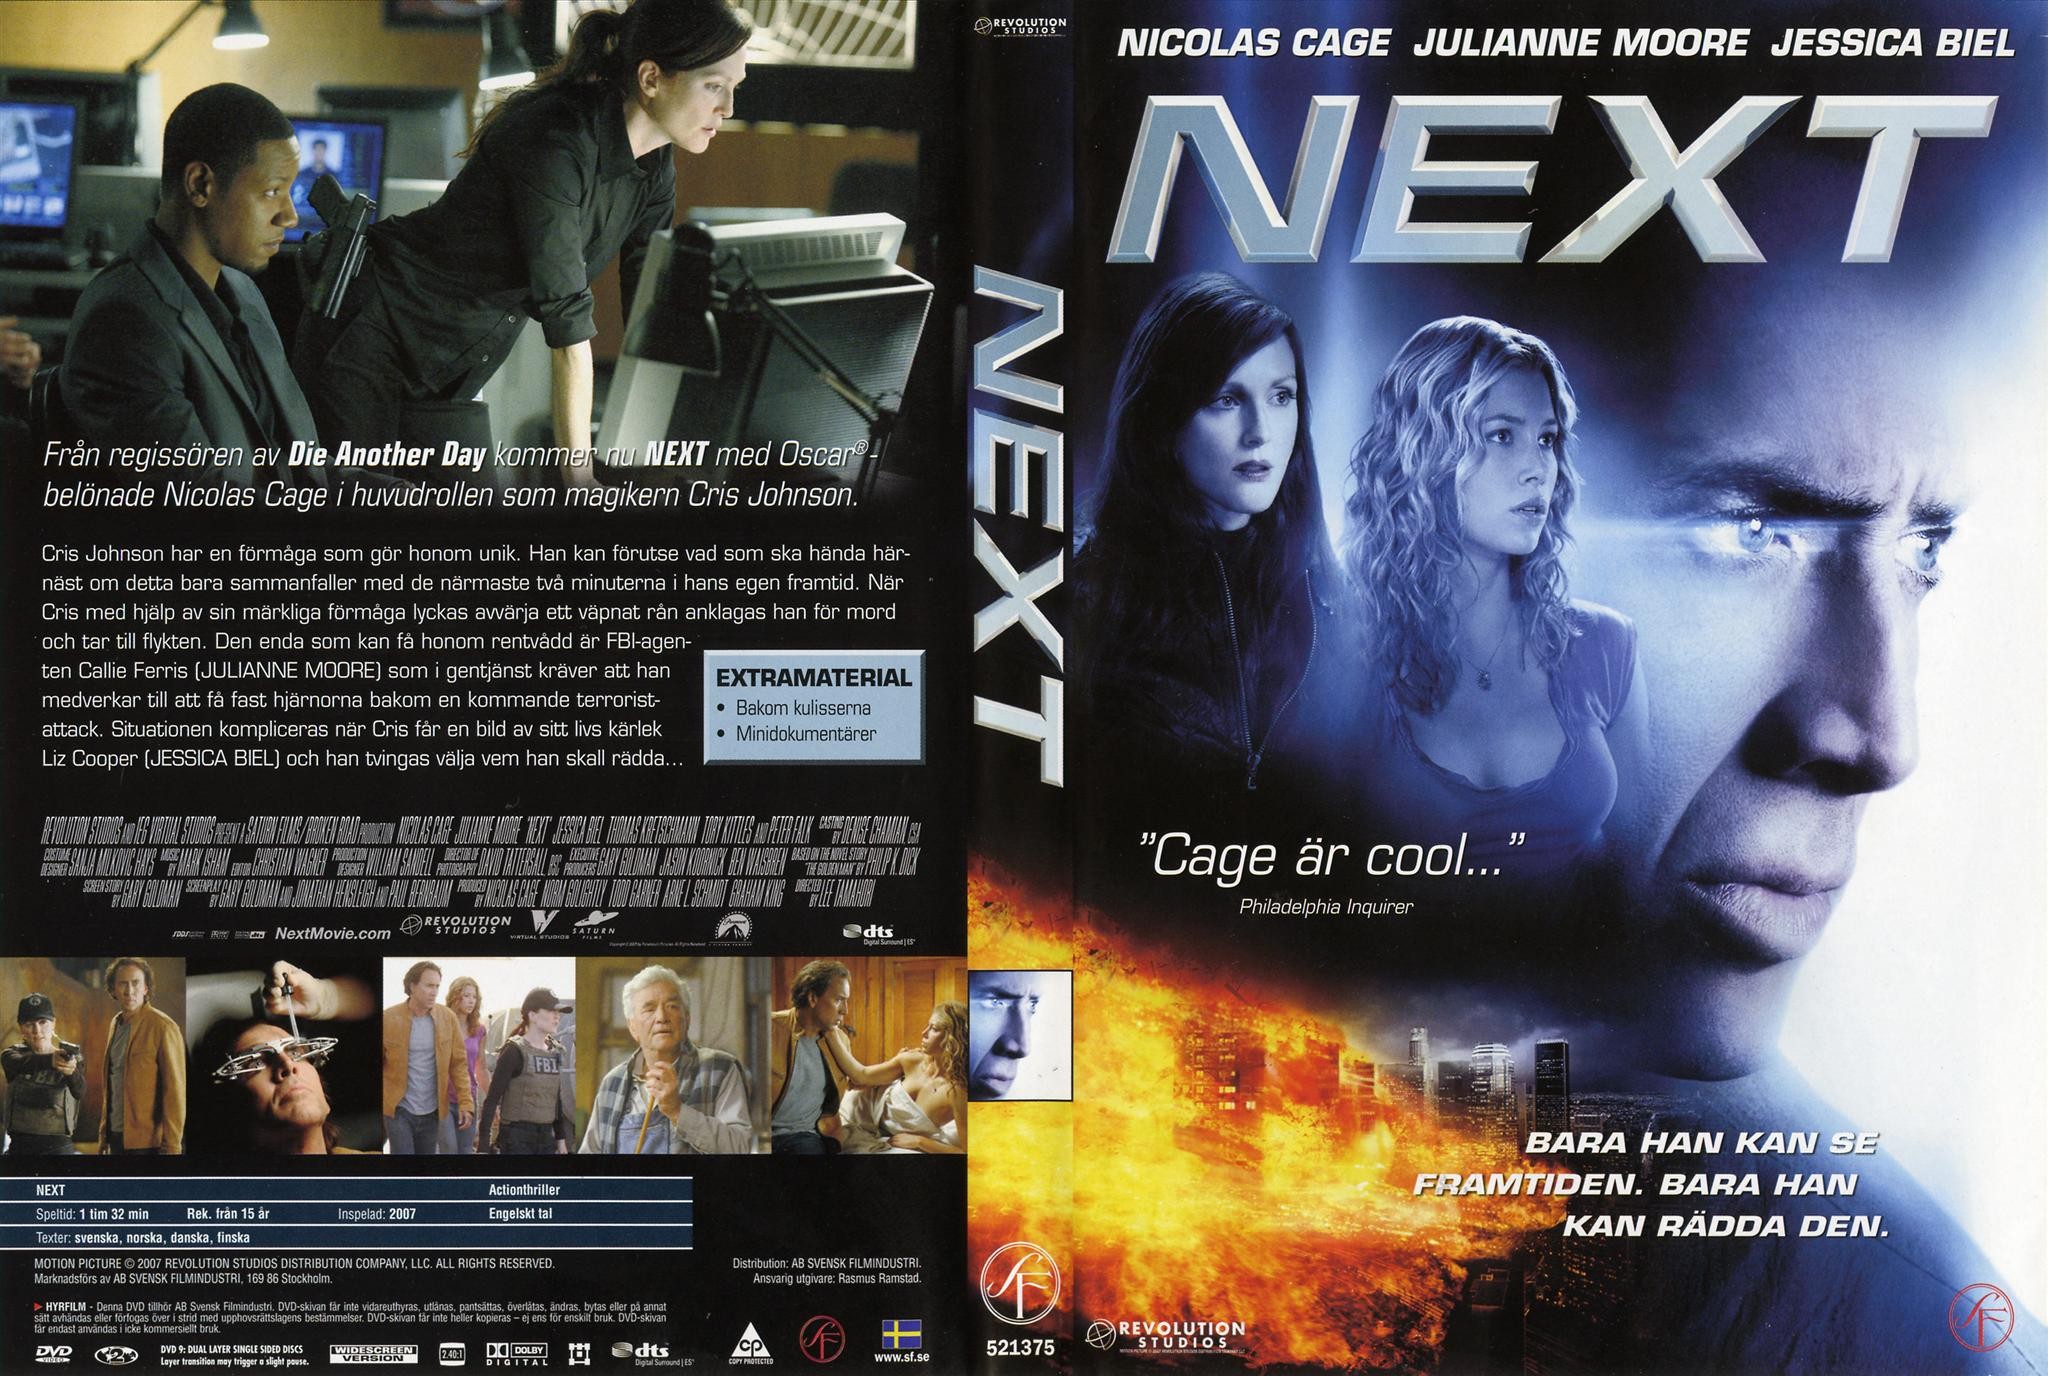 Covers Box Sk Next 2007 High Quality Dvd Blueray Movie Next is a 2007 american science fiction action thriller film directed by lee tamahori and starring nicolas cage, julianne moore, jessica biel, thomas kretschmann, tory kittles, and peter falk. dvd blueray movie